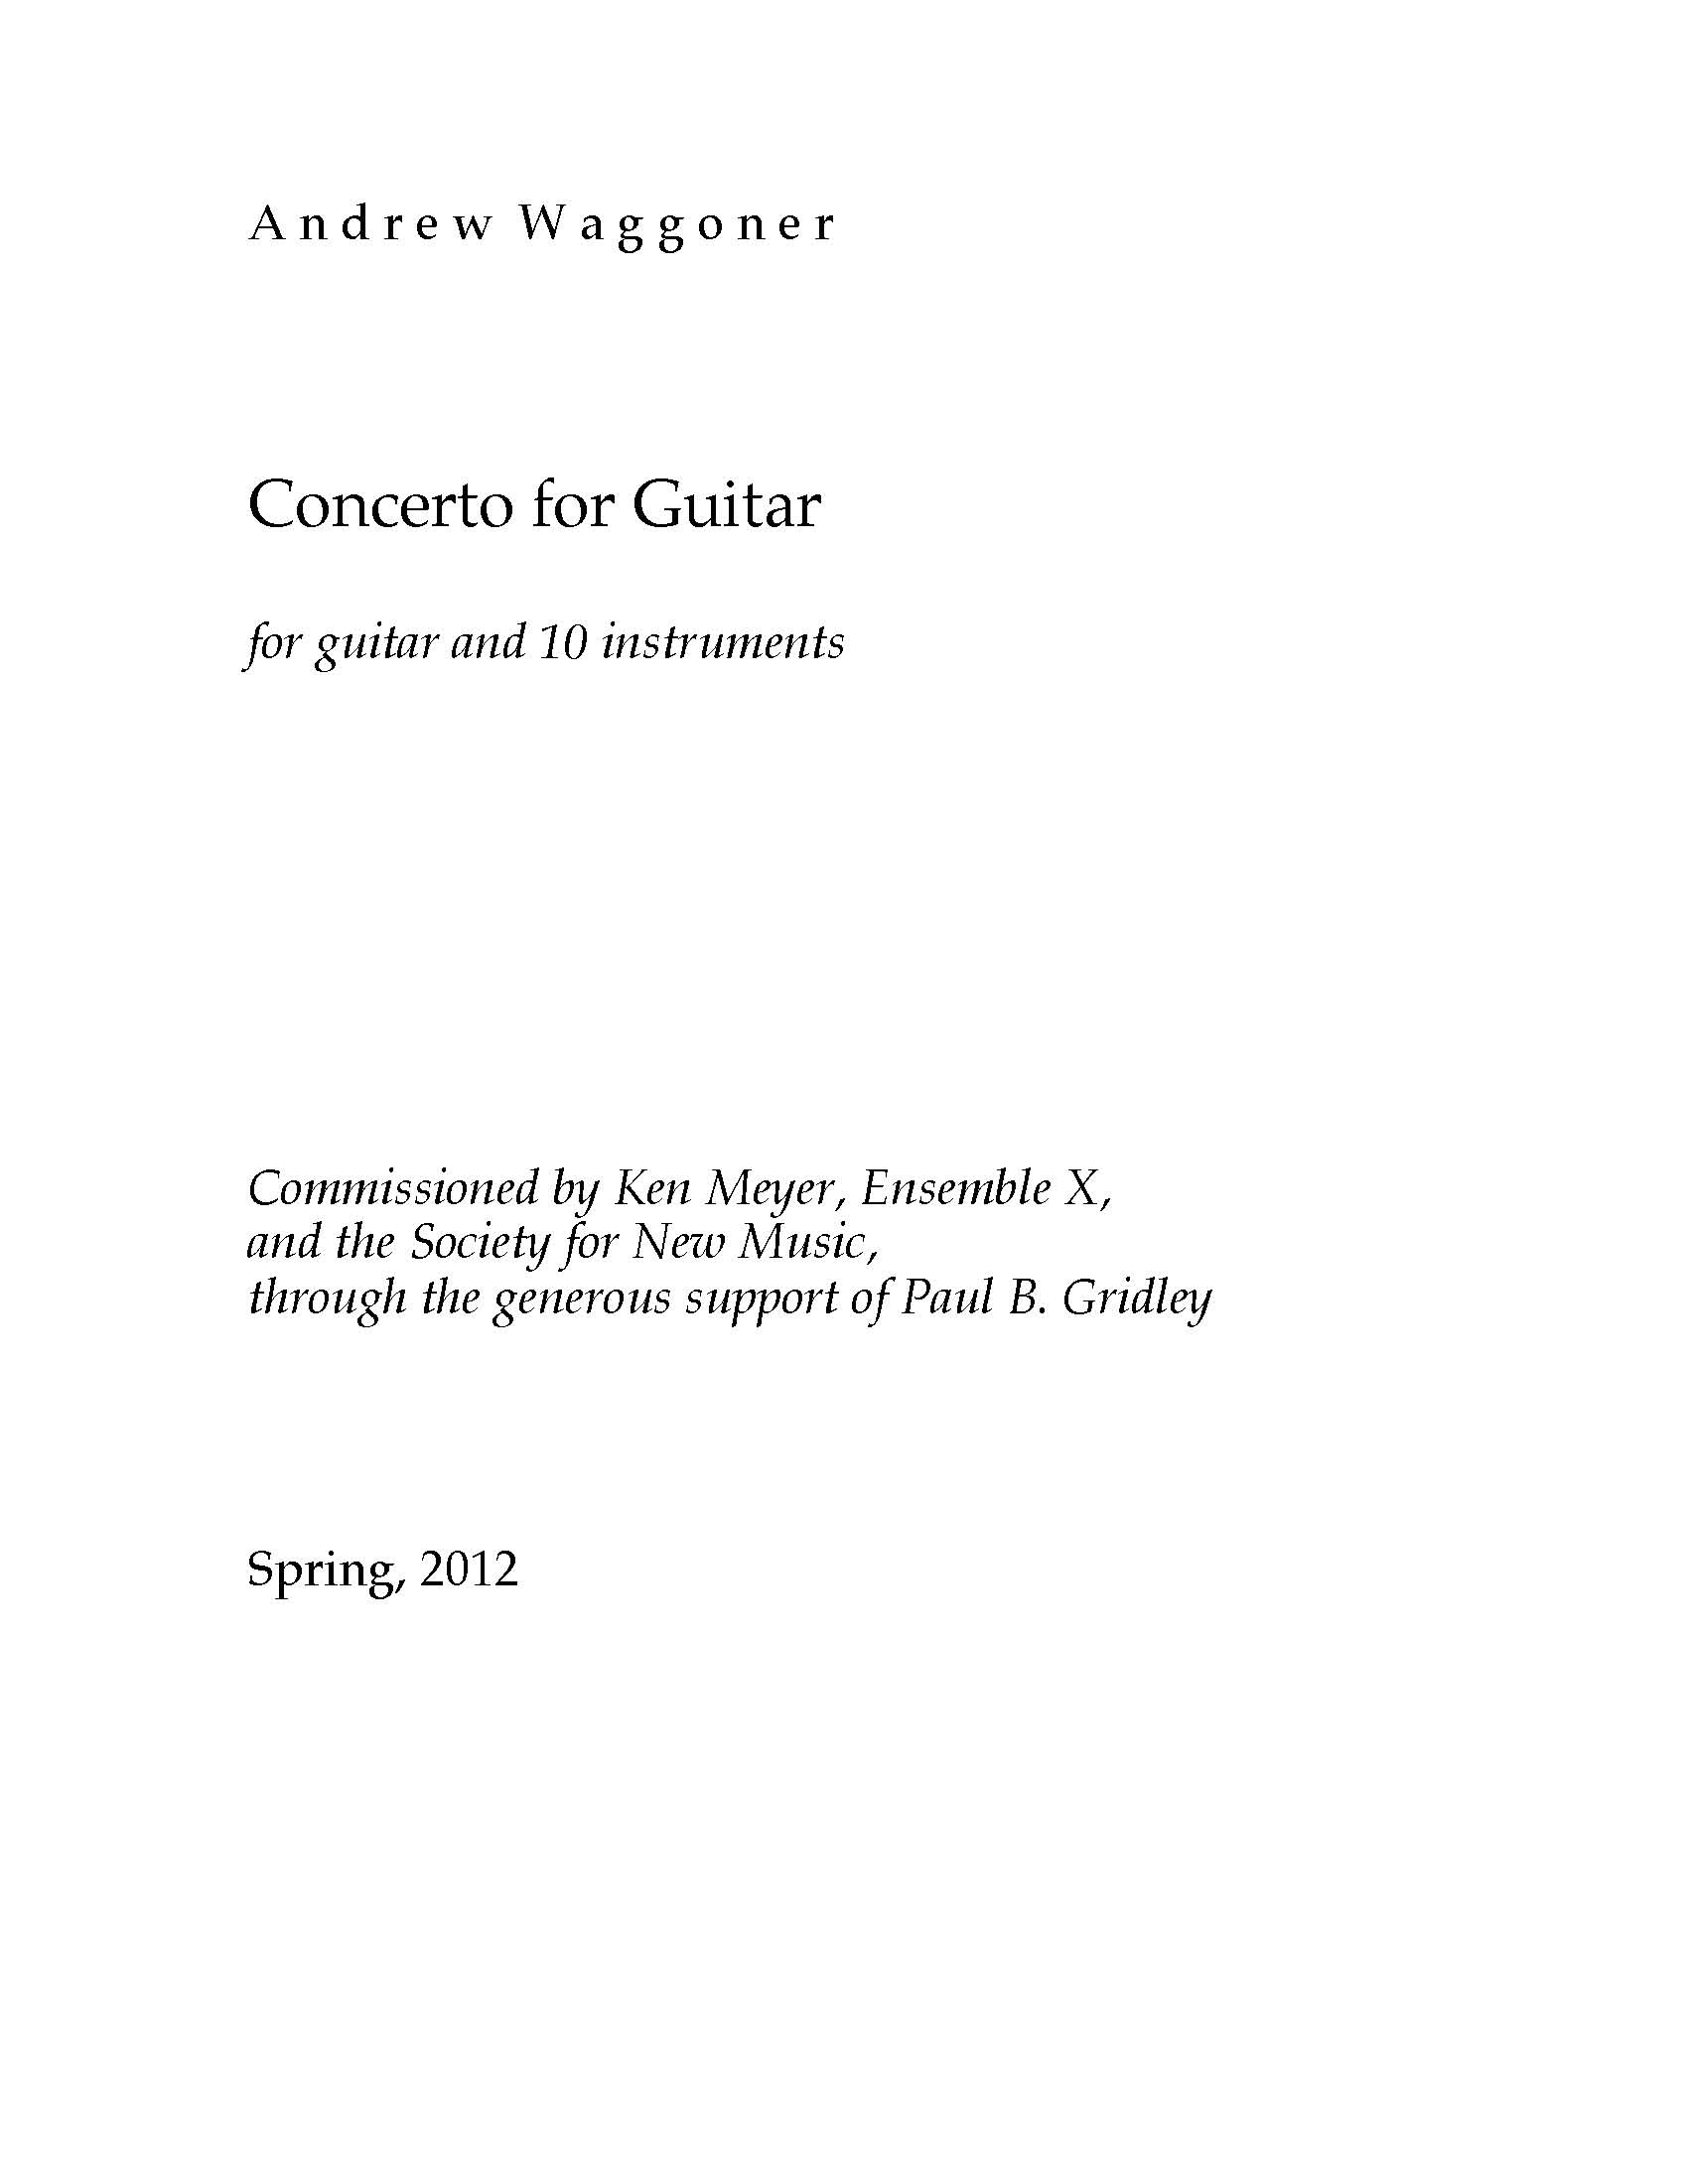 Concerto for Guitar for Guitar and 10 instruments